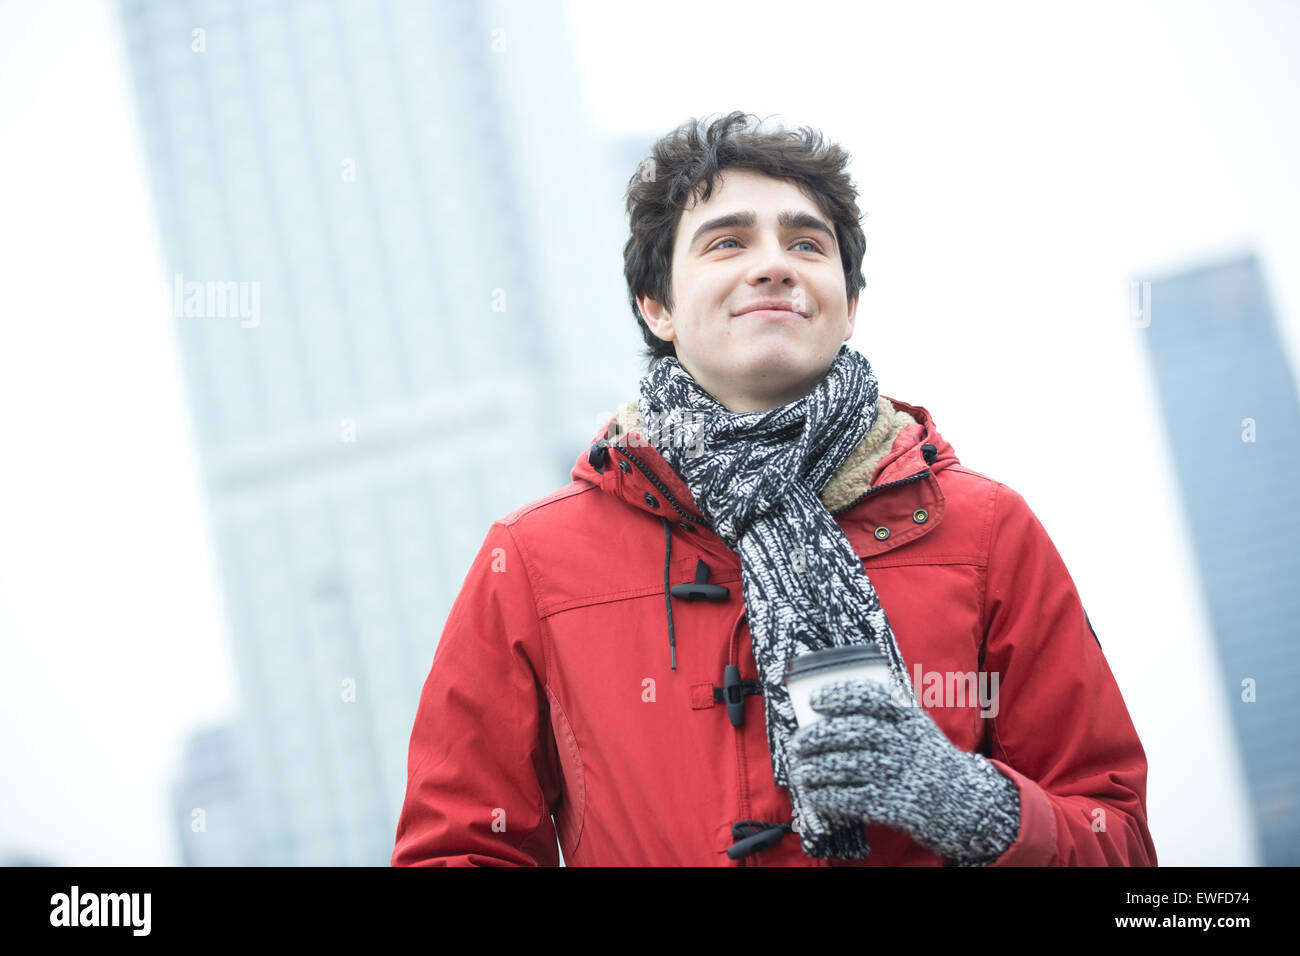 Smiling man in warm clothing looking away while holding disposable cup outdoors Stock Photo